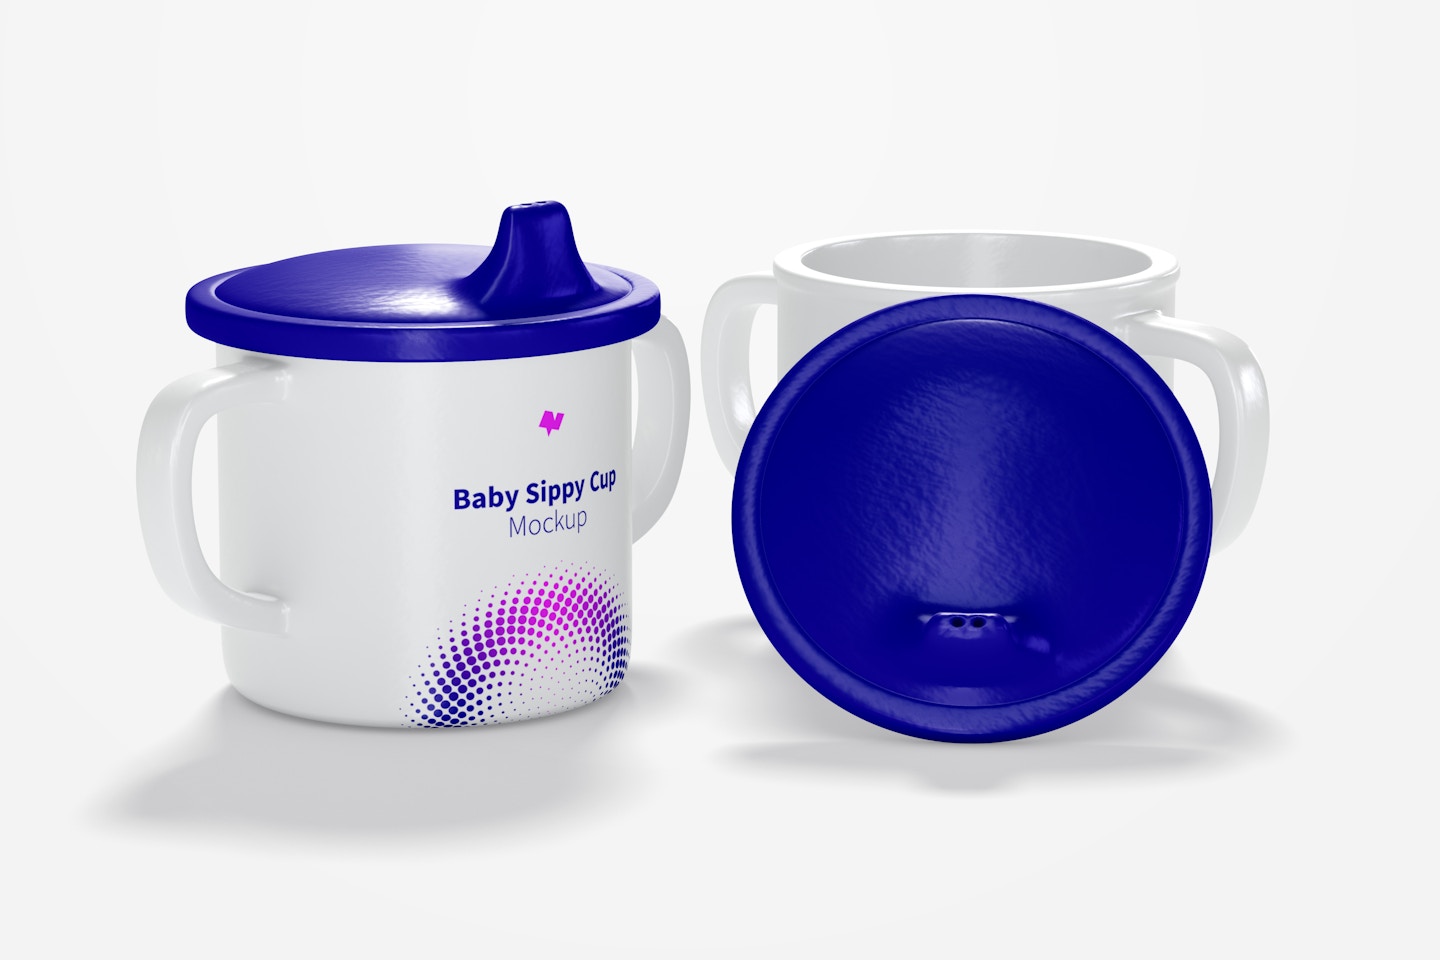 Baby Sippy Cup Mockup, Opened and Closed